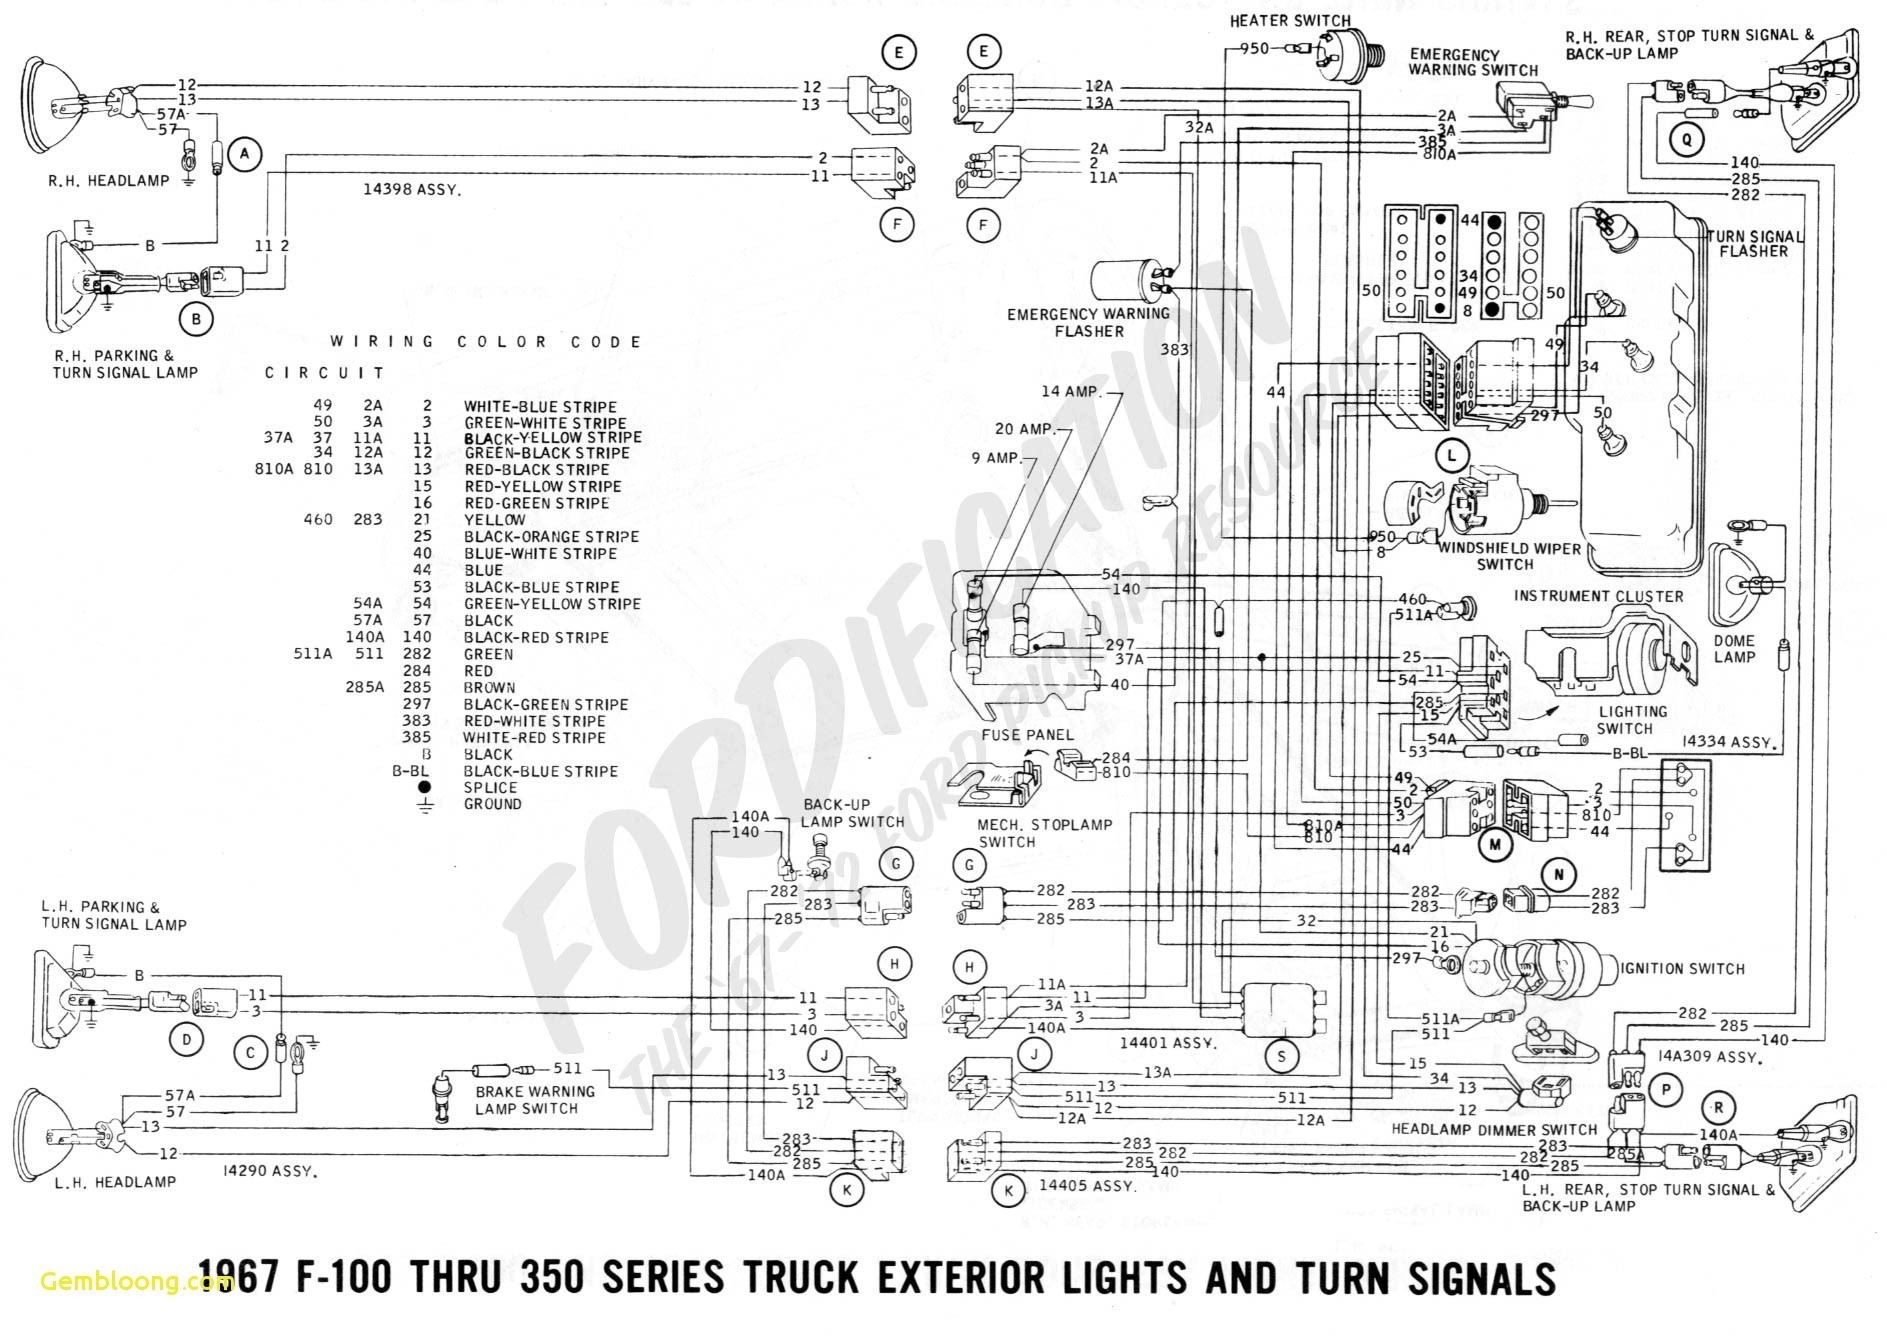 4 6 ford Engine Diagram Wiring Diagram 3 Way Switch Guitar Starter Motor solenoid Simplicity Of 4 6 ford Engine Diagram